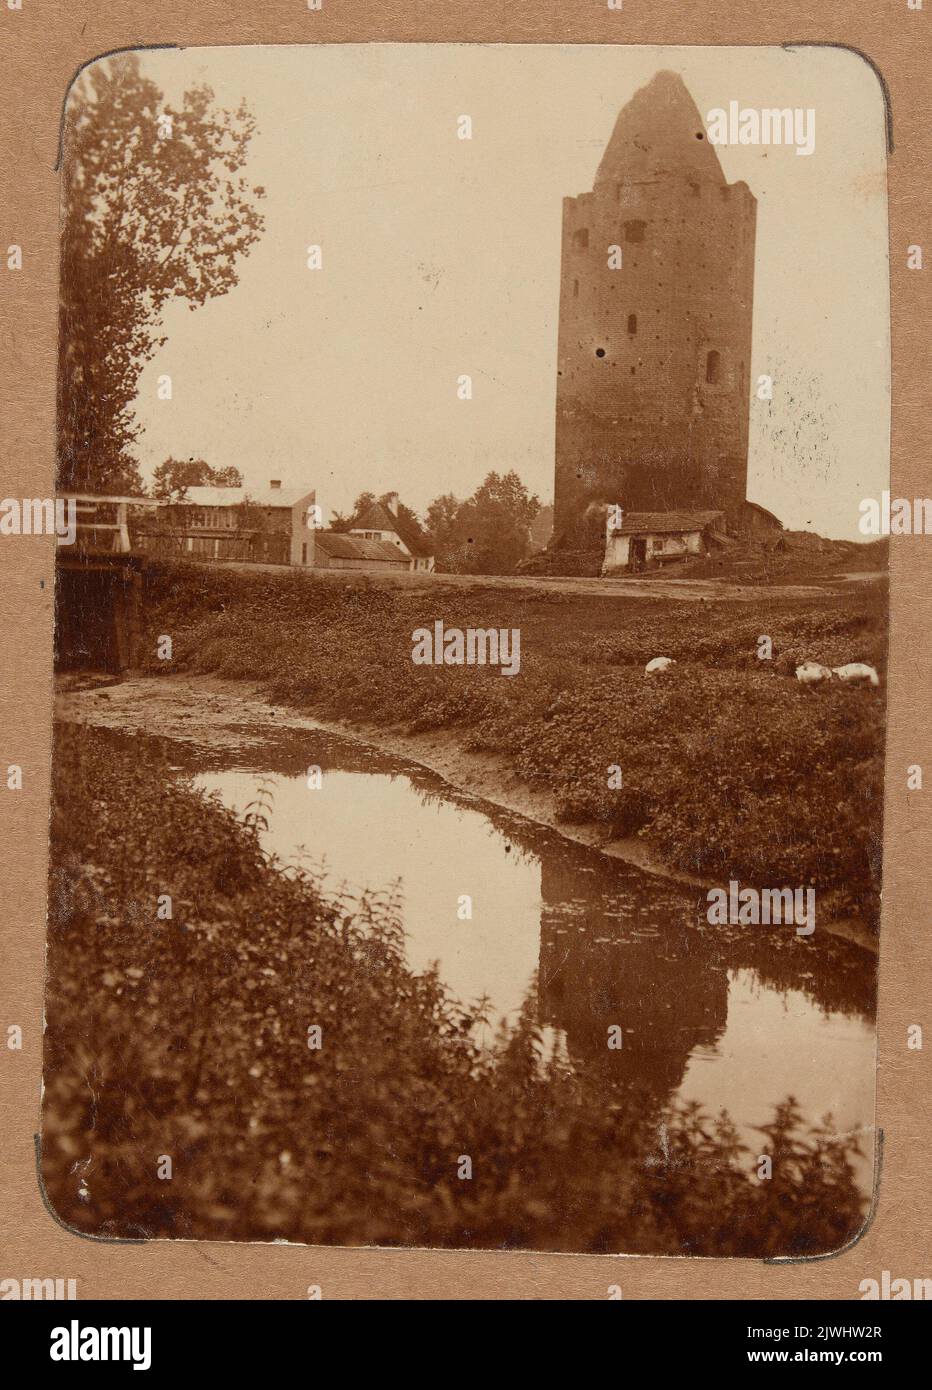 Rawa Mazowiecka. Tower of the castle of dukes of Masovia - general view. unknown, photographer Stock Photo